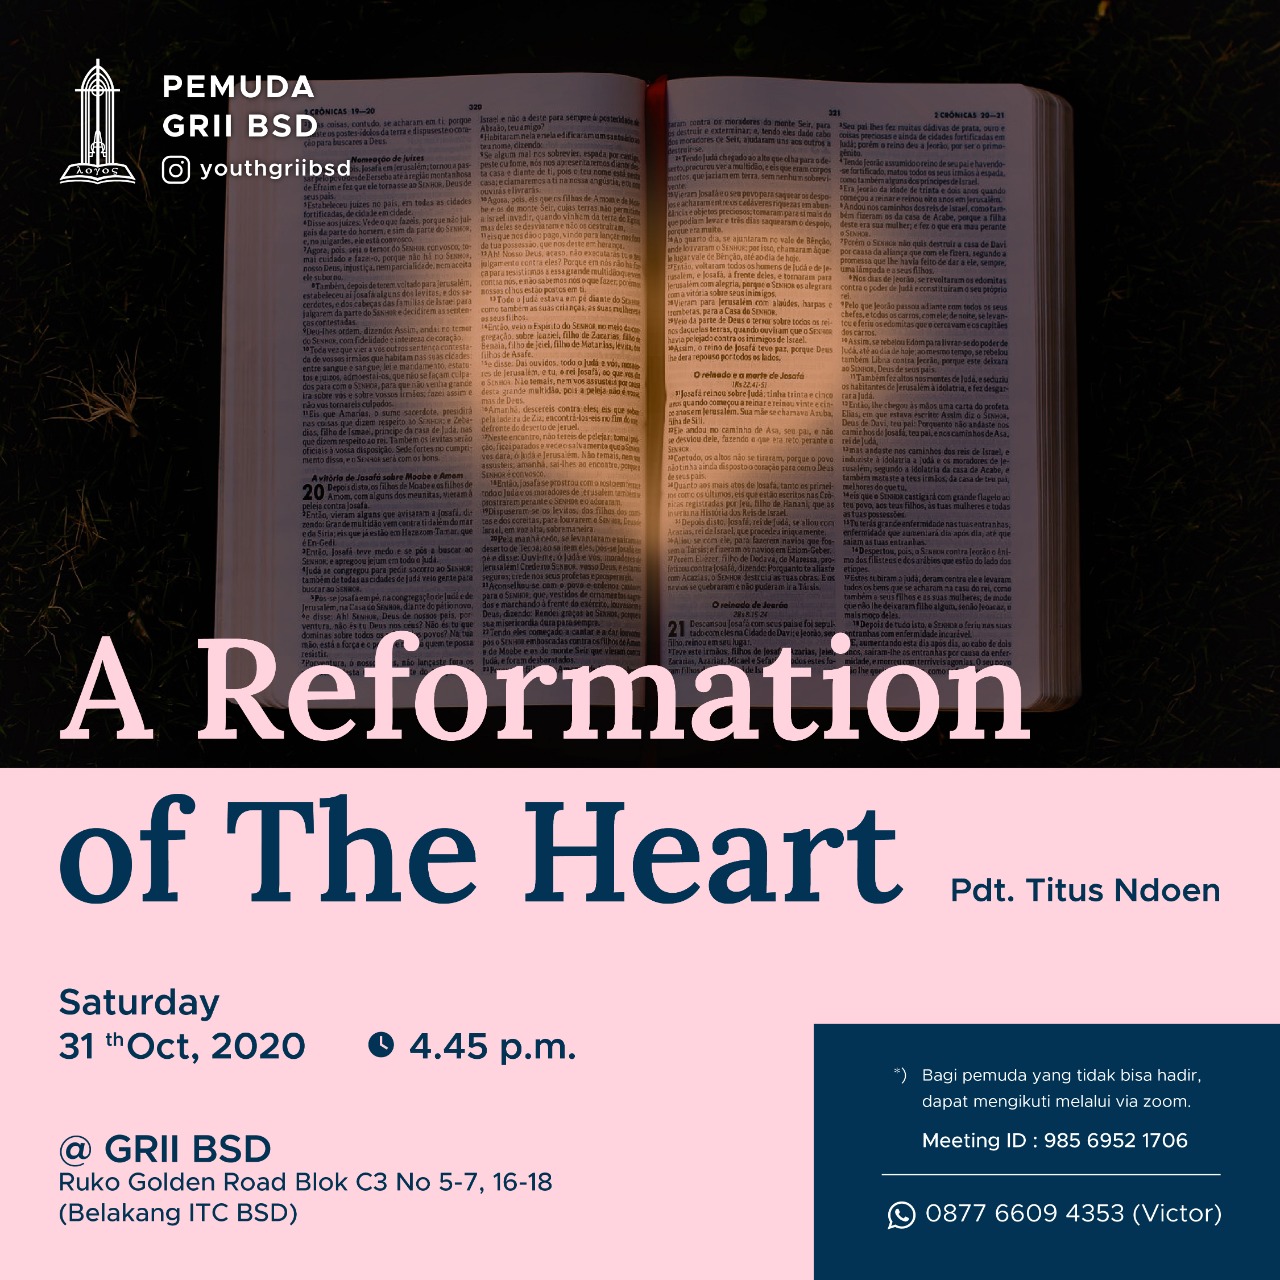 A Reformation of The Heart